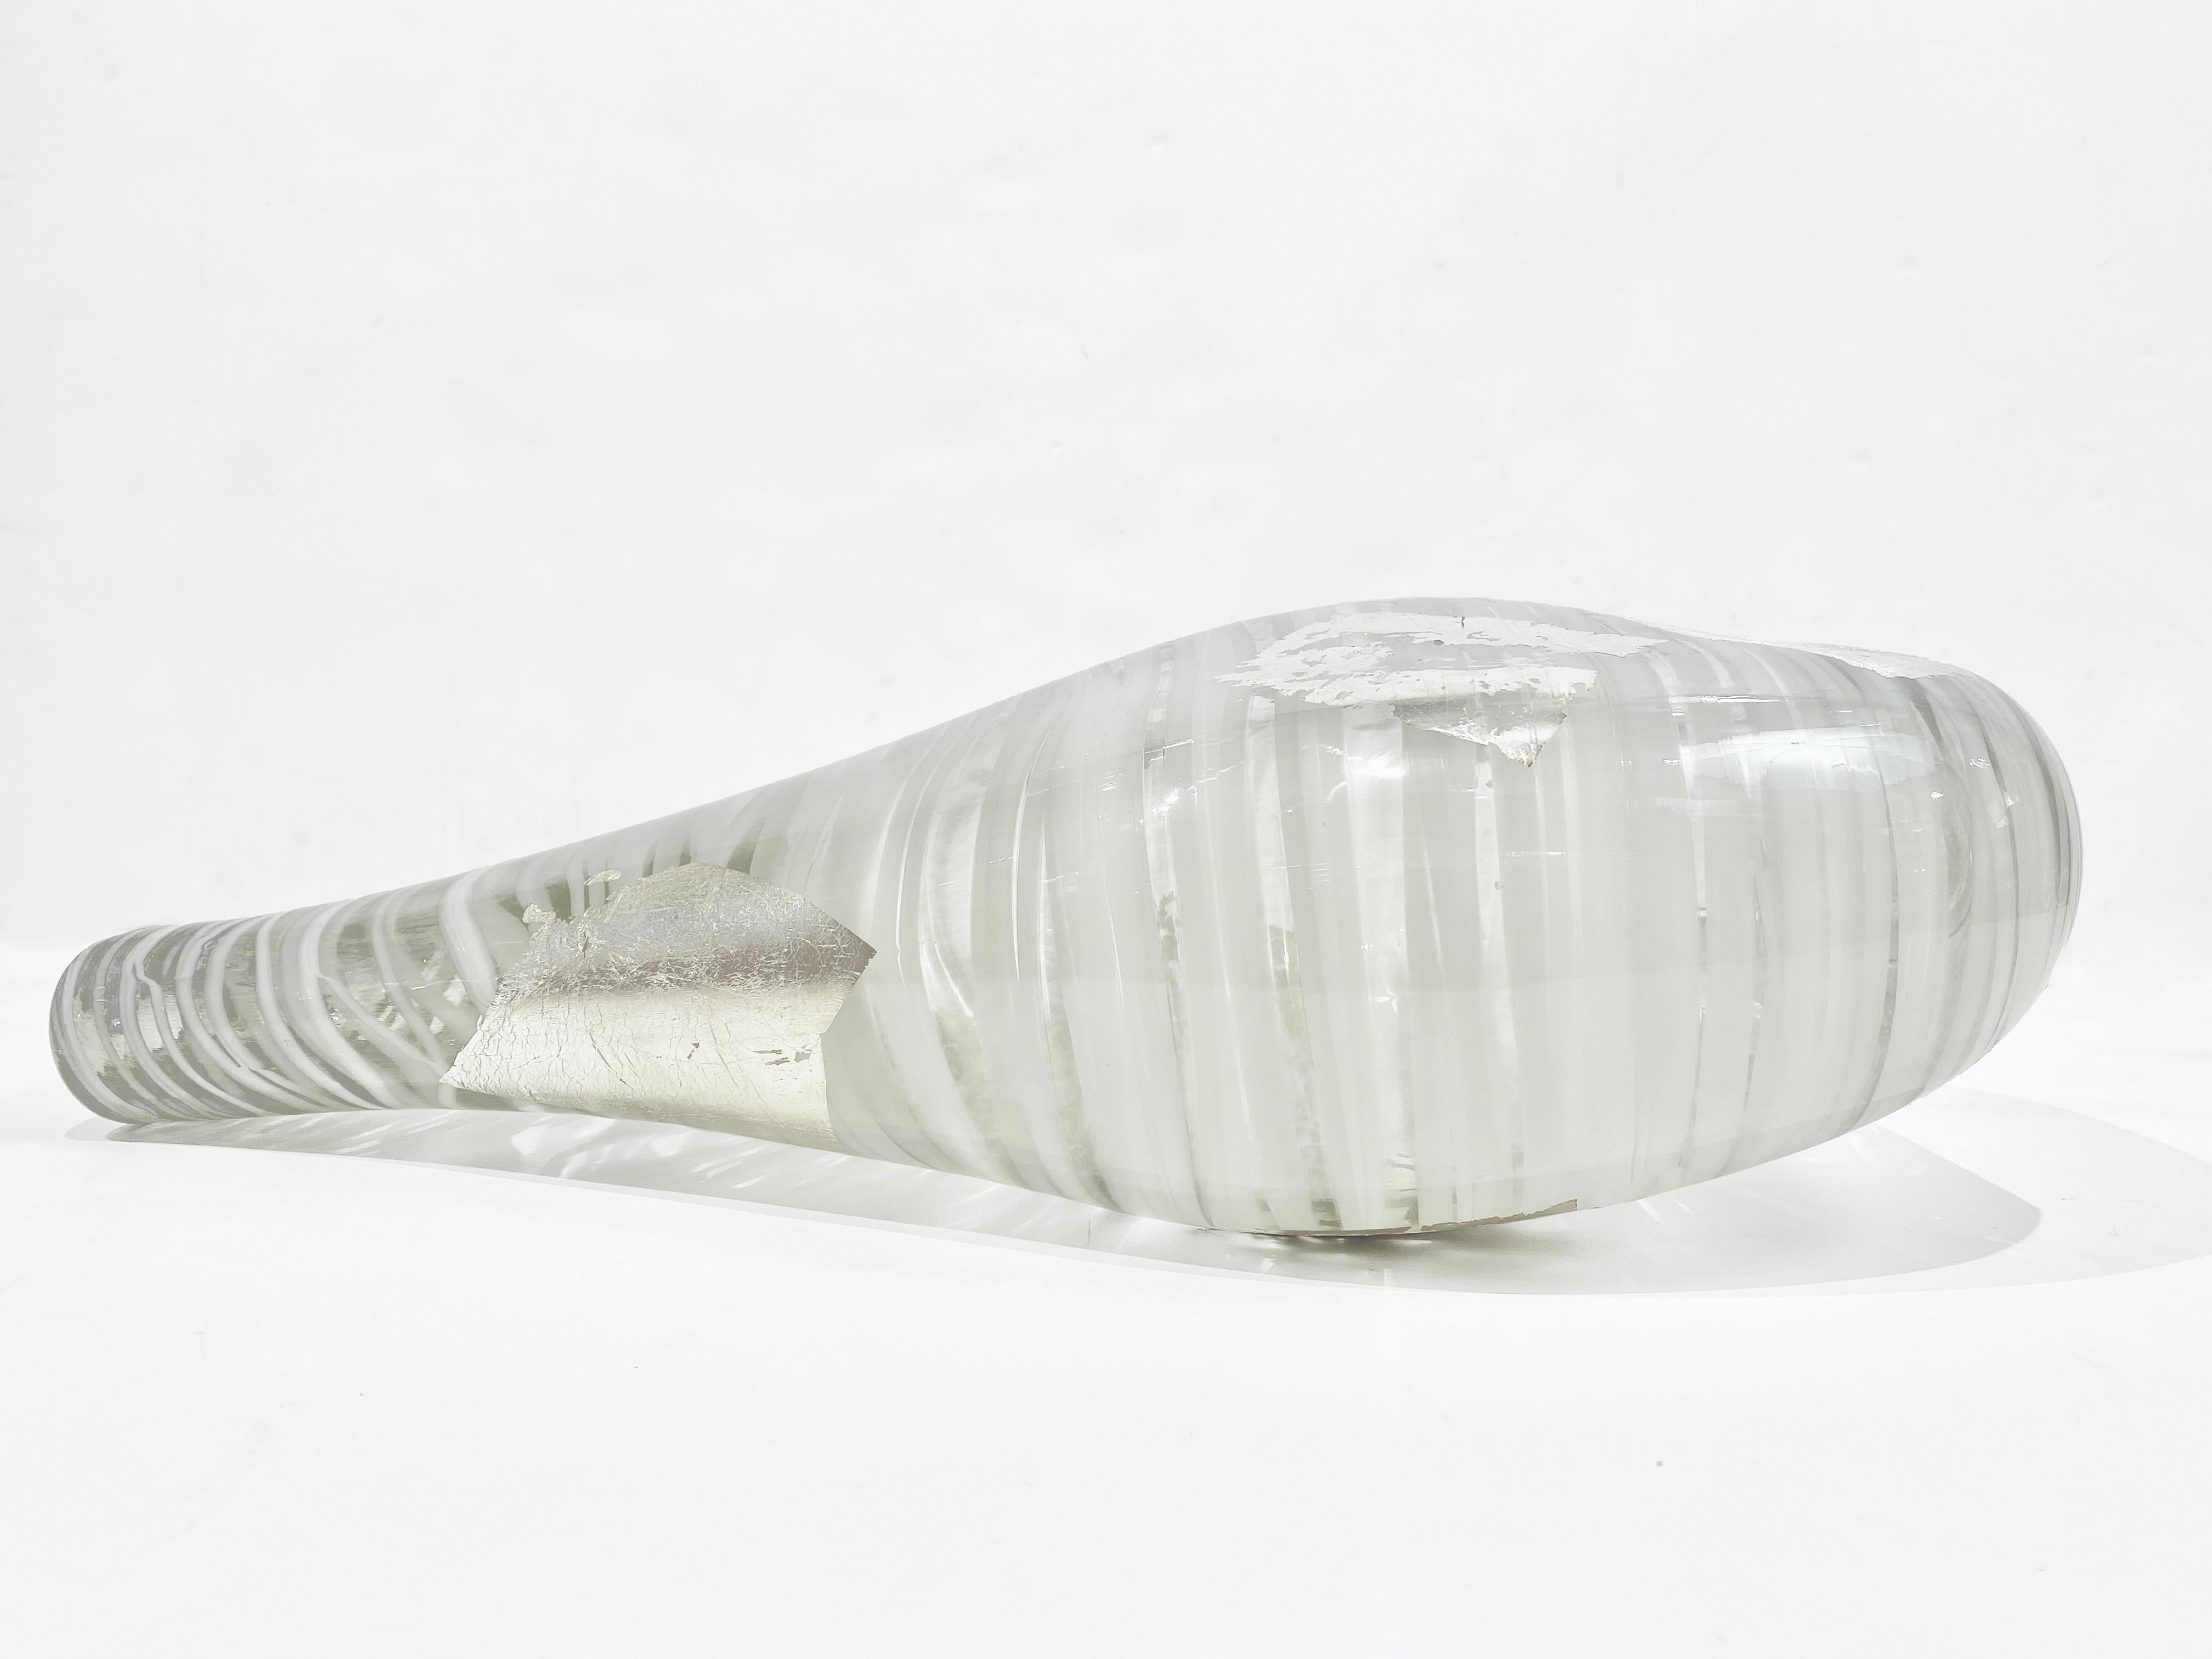 Italian Art Deco Style Silver Leaf White Clear Murano Glass Sculpture Vase For Sale 8